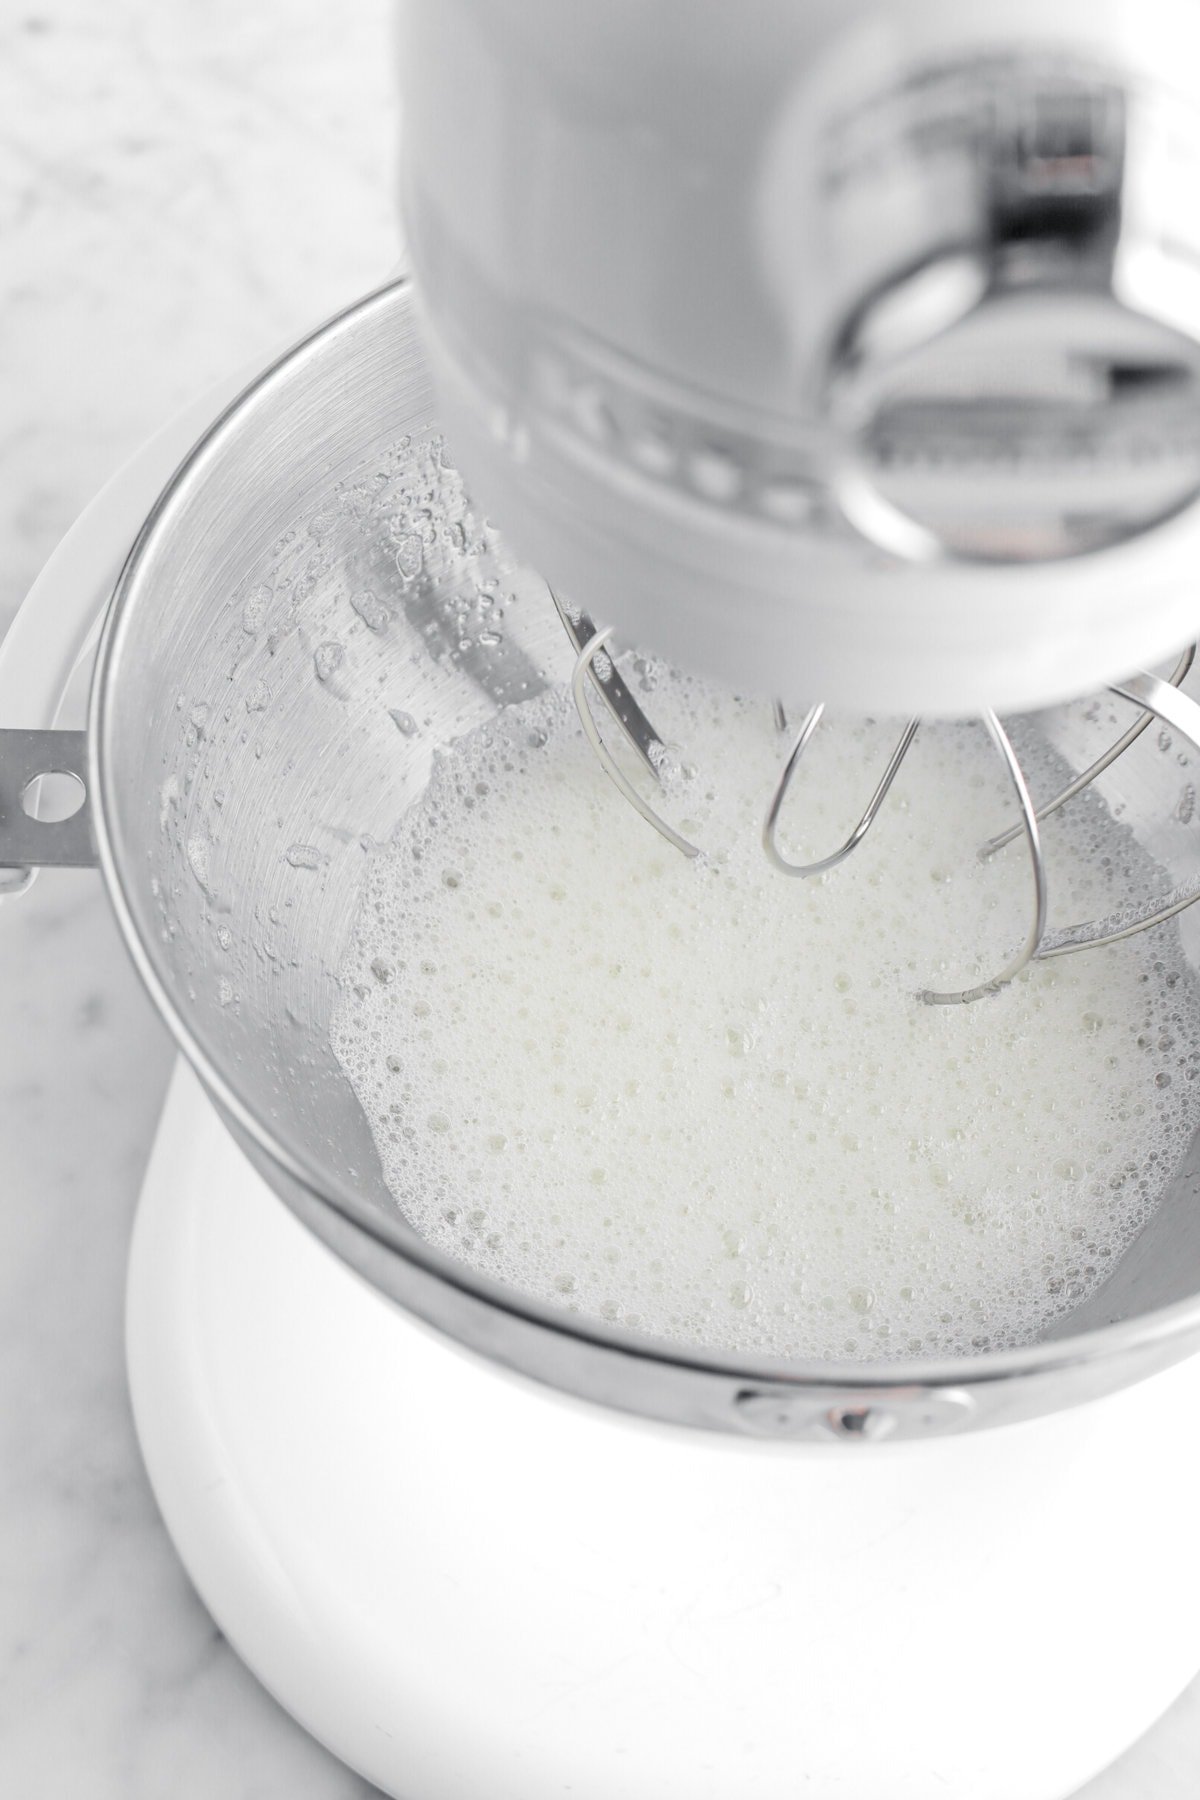 foamy egg whites in stand mixer.